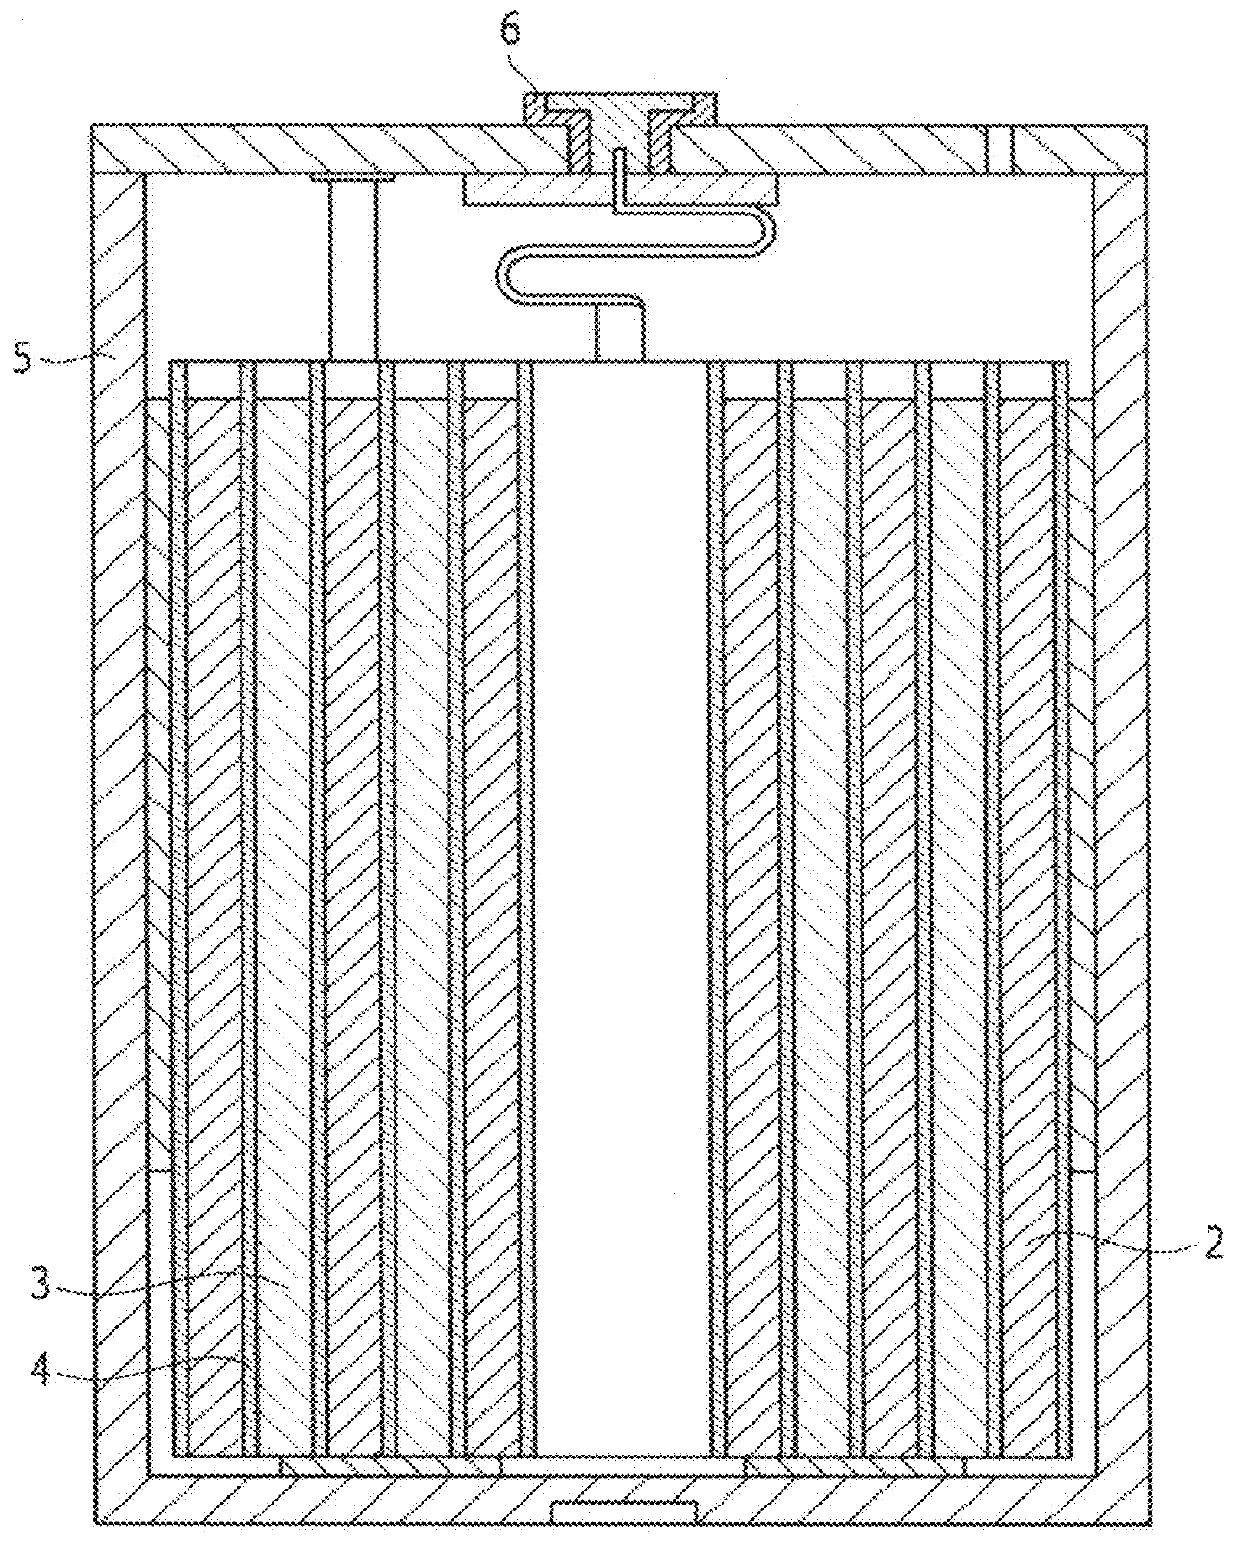 Electrolyte for lithium ion battery, and lithium ion battery including same